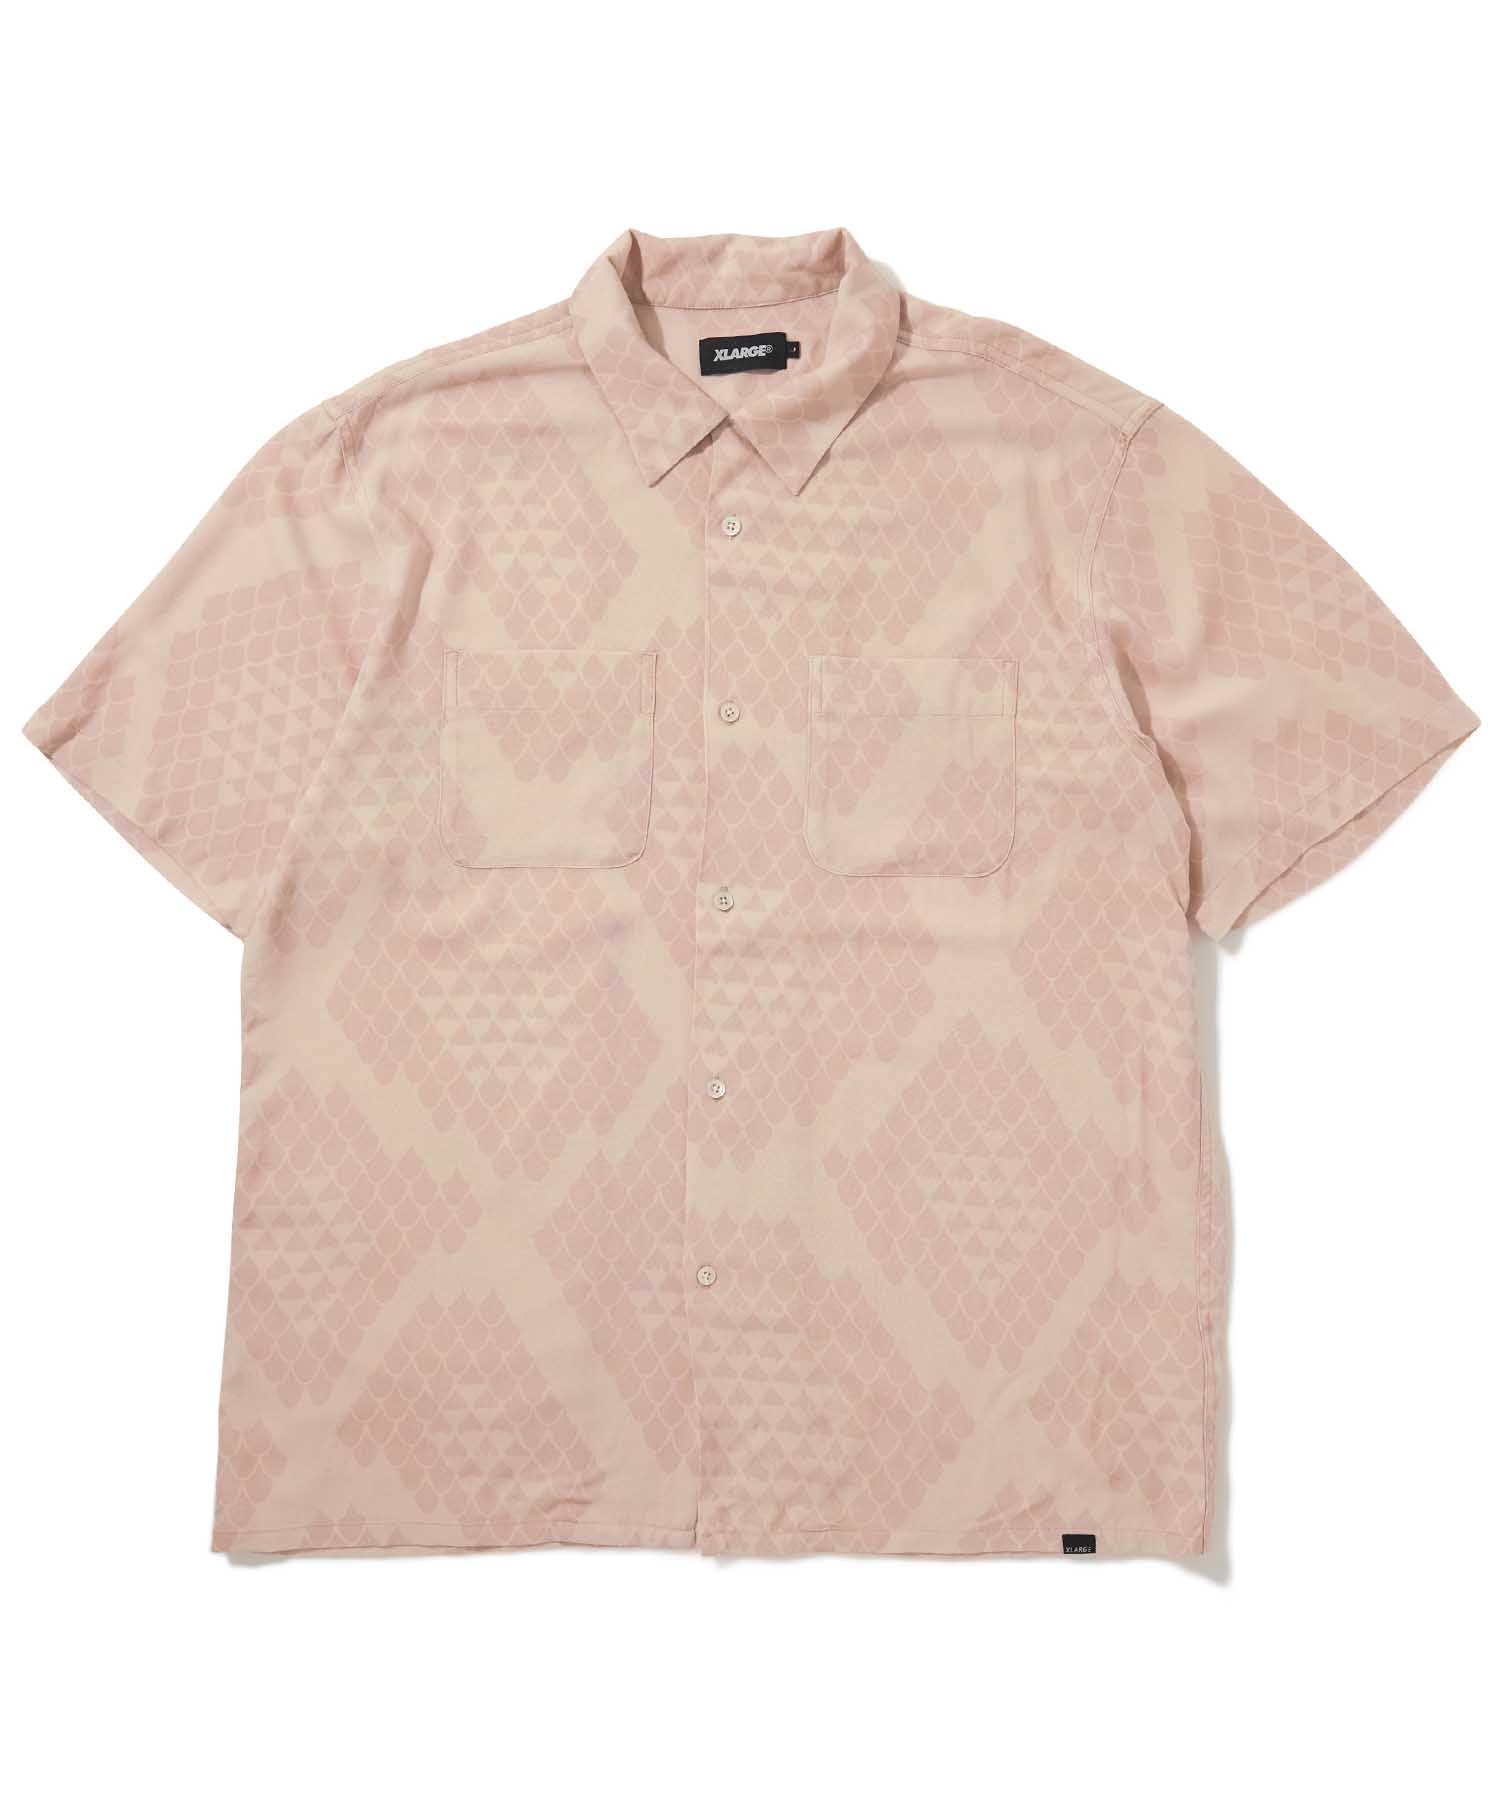 S/S REPTILE ALLOVER PRINTED SHIRT SHIRT XLARGE  